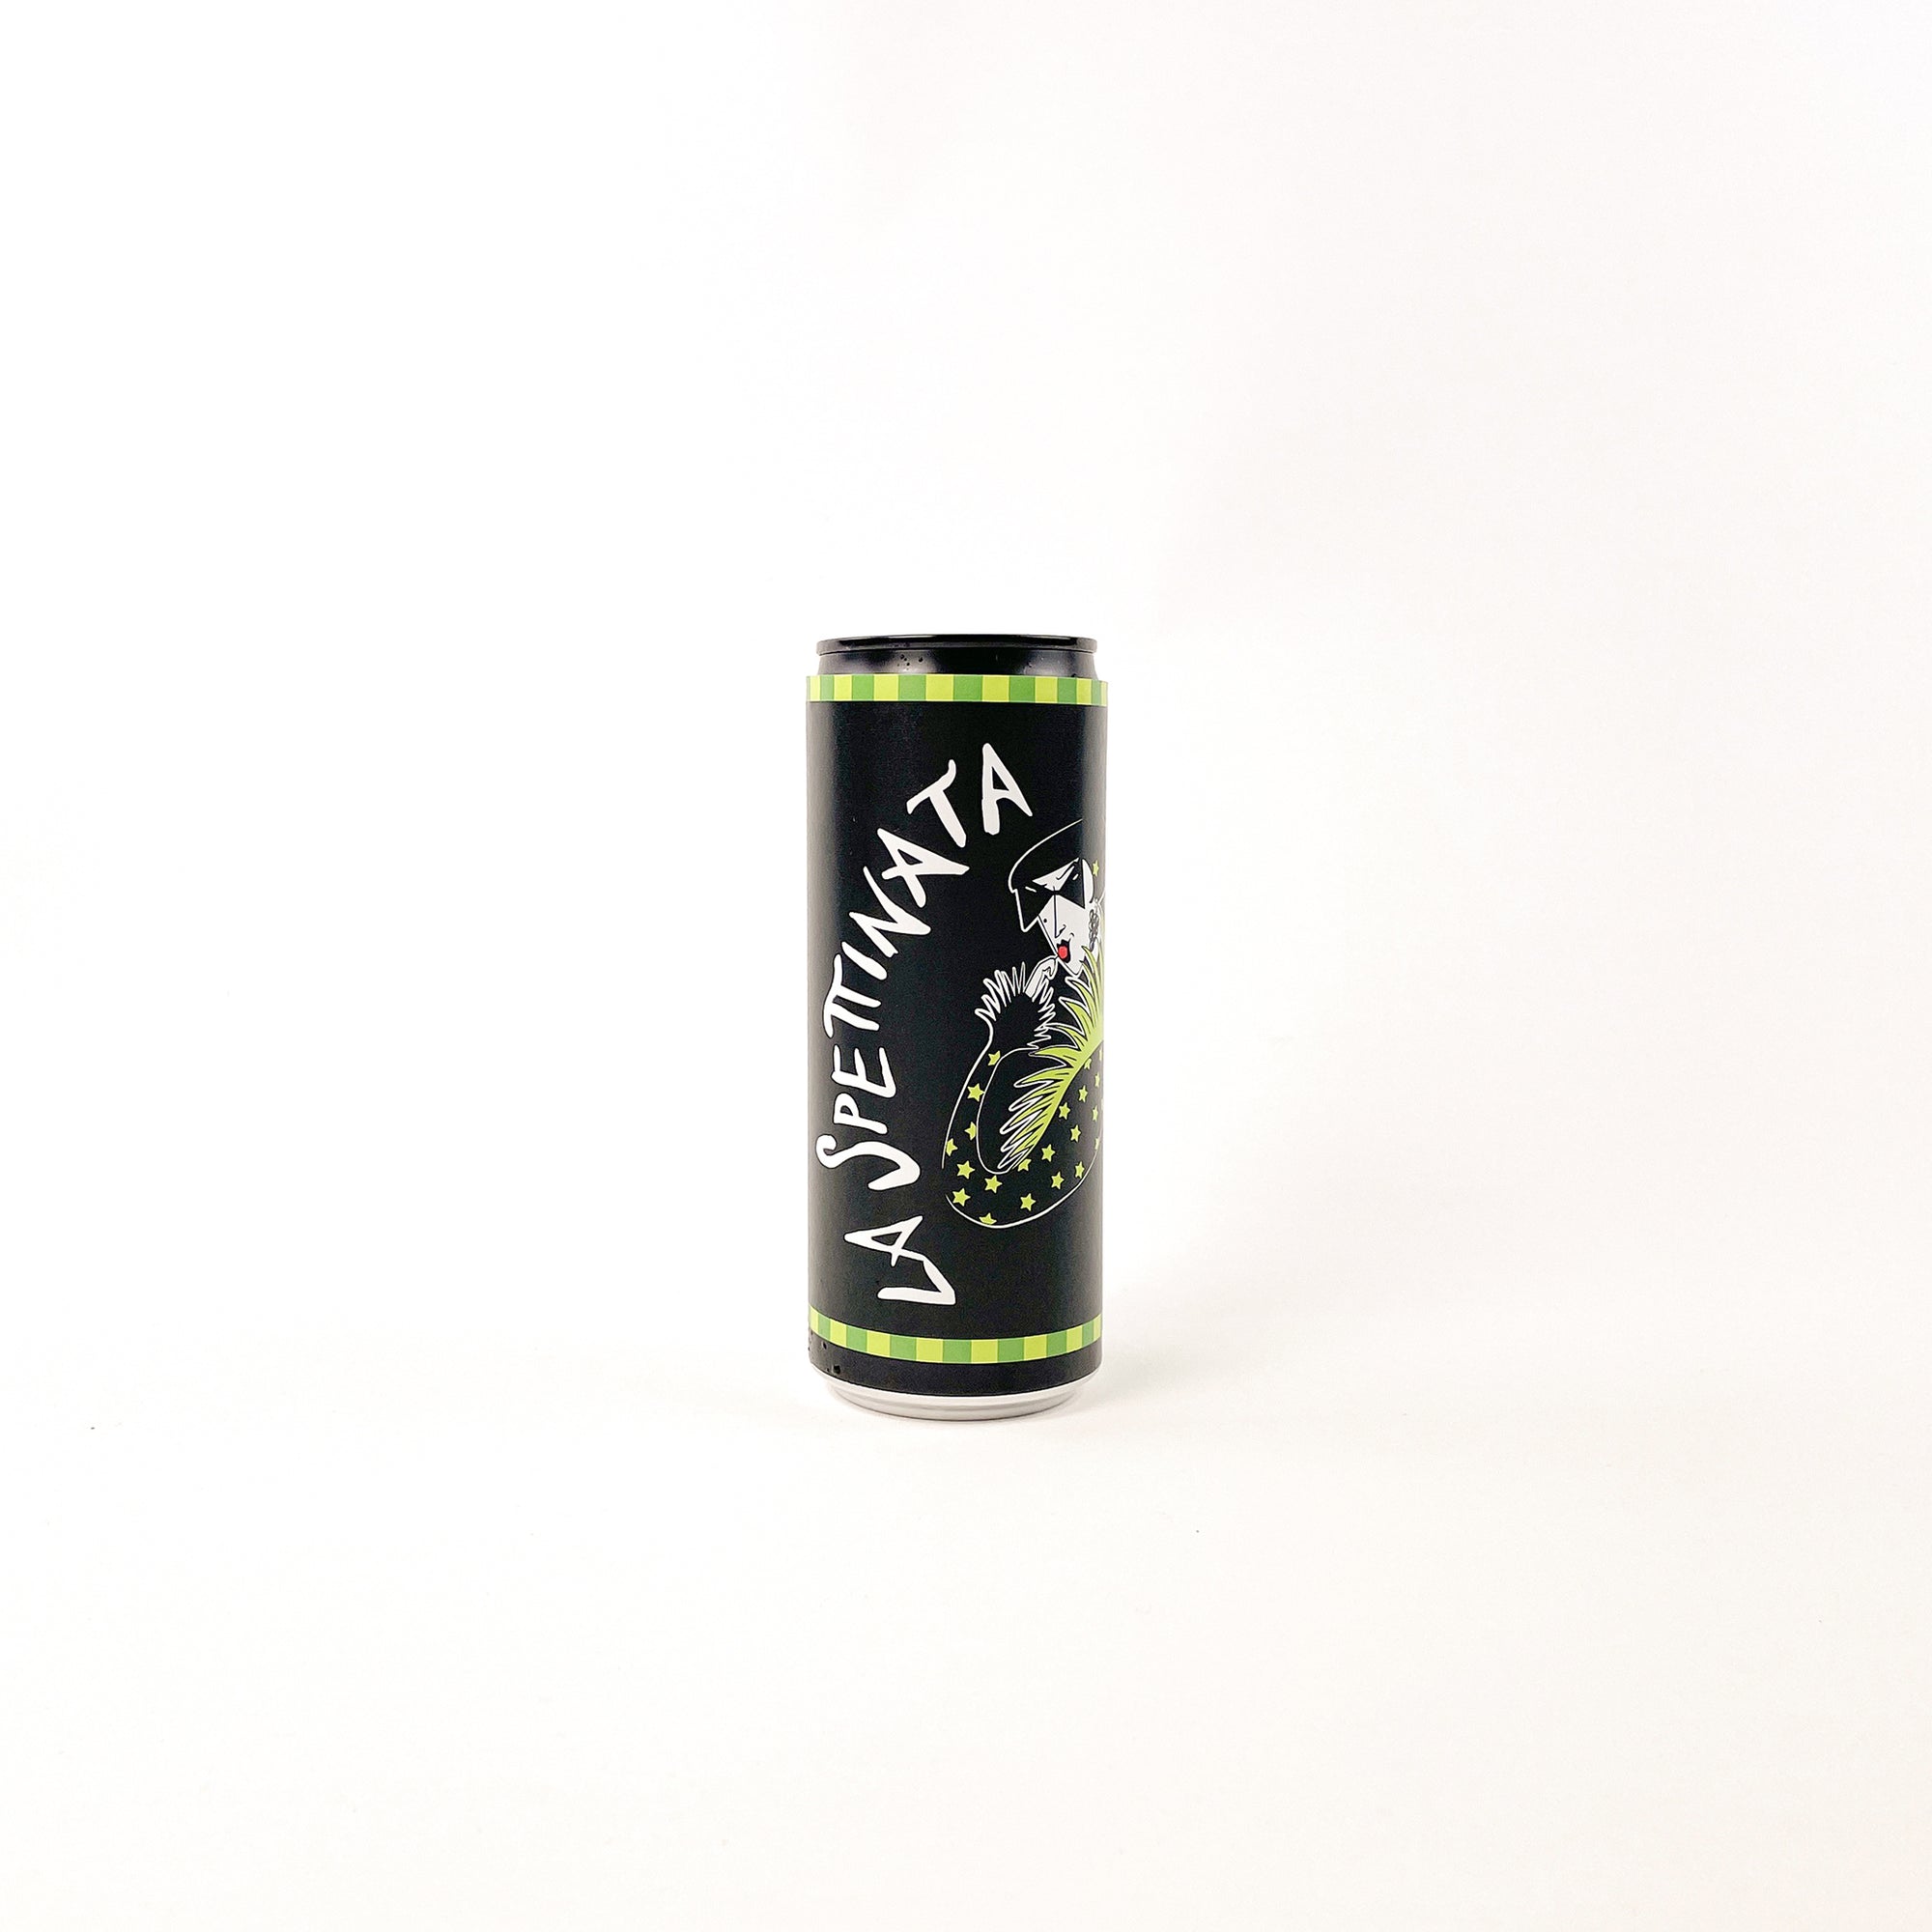 Natural Sparkling wine in a can, canned pet nat